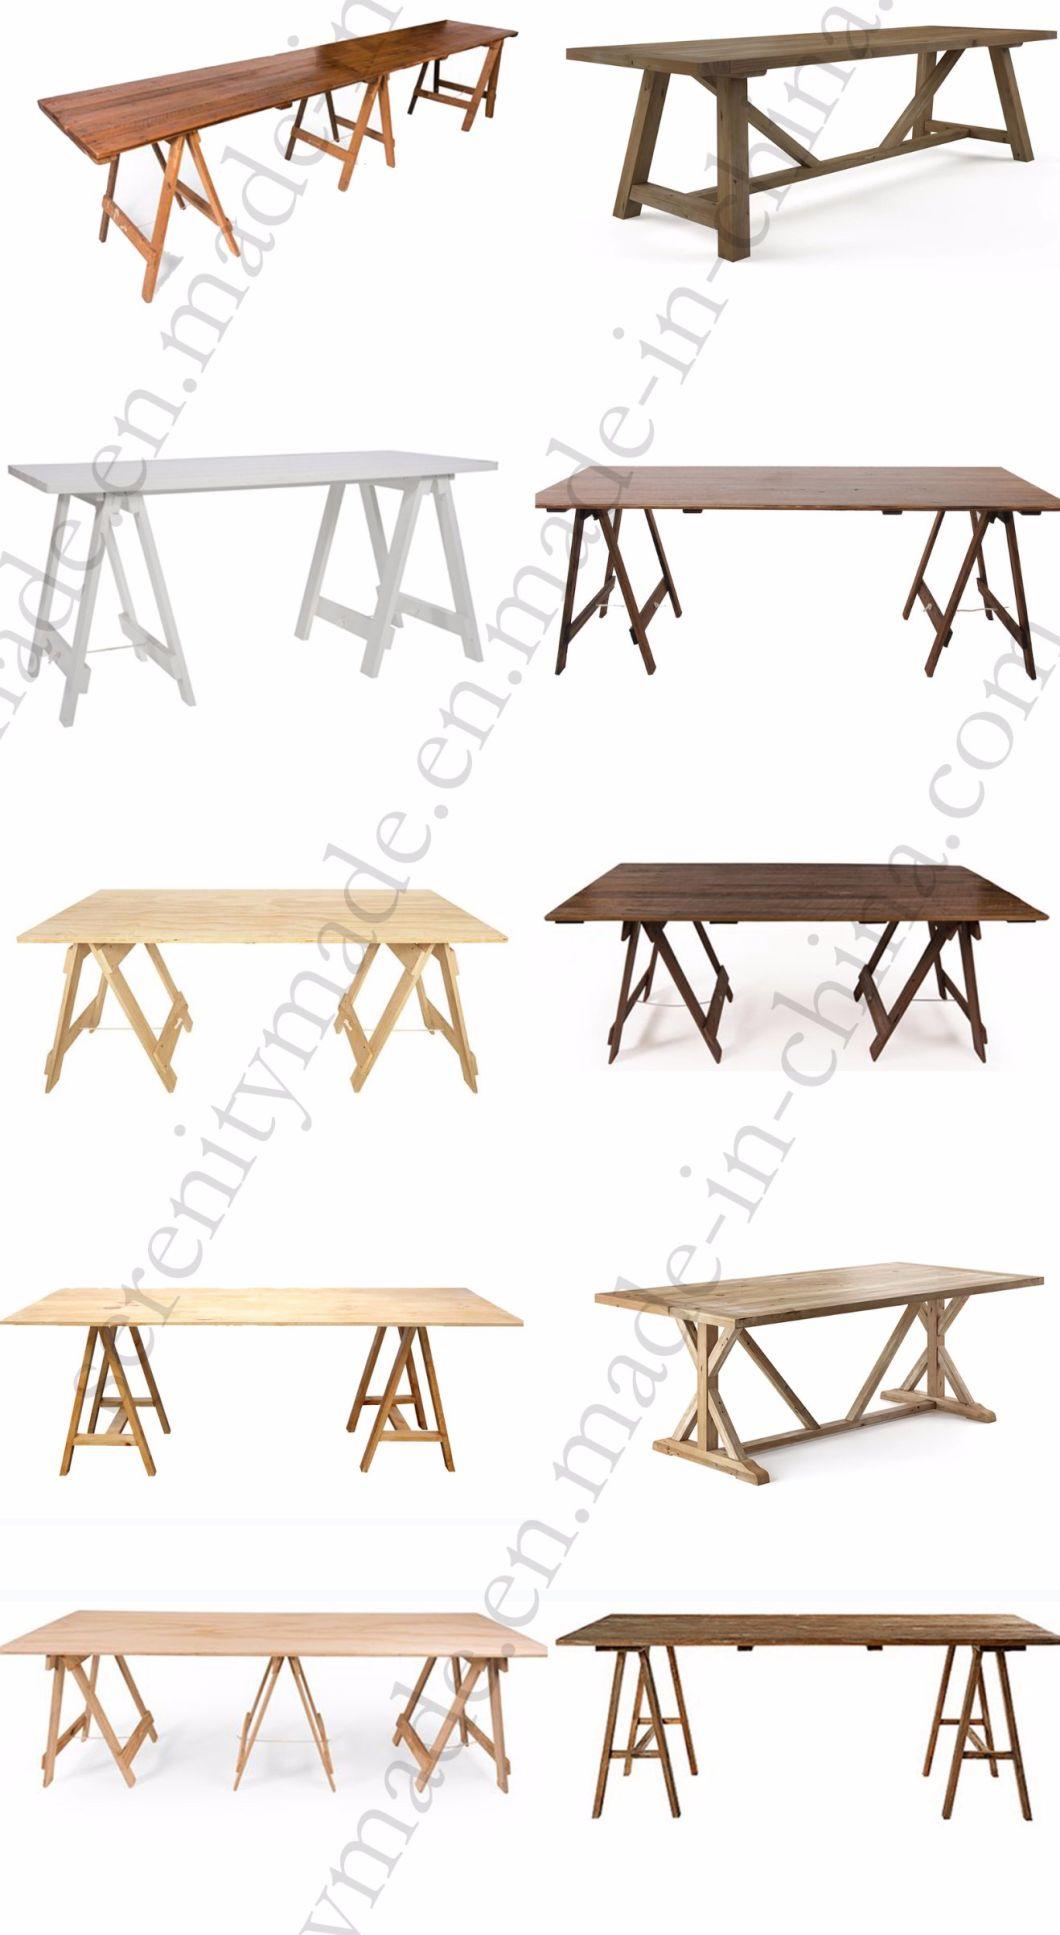 Antique Style Hotel Furniture Wooden Dining Table for Restaurant/Dining Room